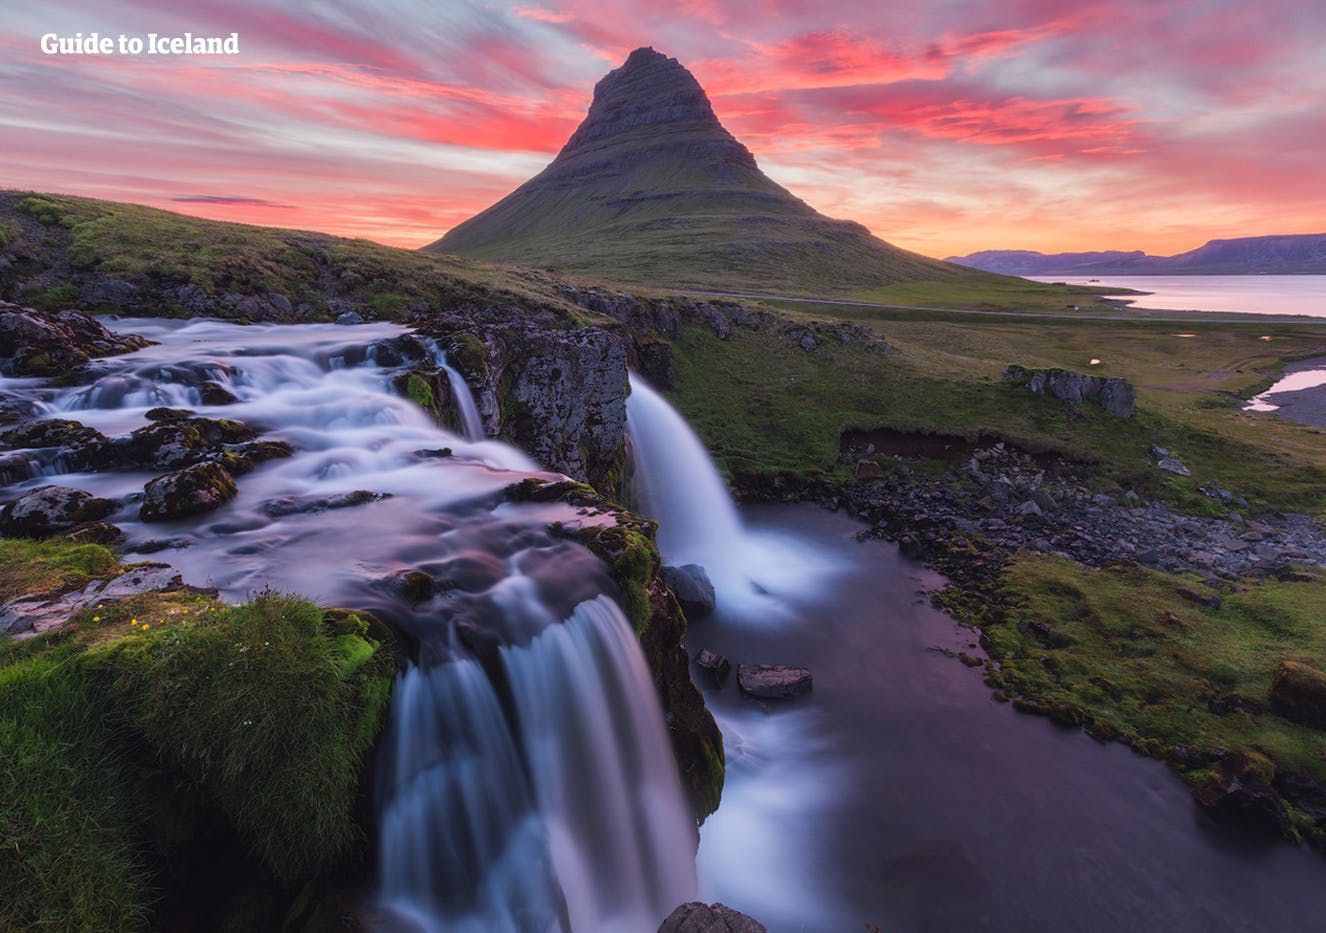 The Hound in Game of Thrones described Kirkjufell on the Snæfellsnes Peninsula as 'the mountain like an arrowhead'.